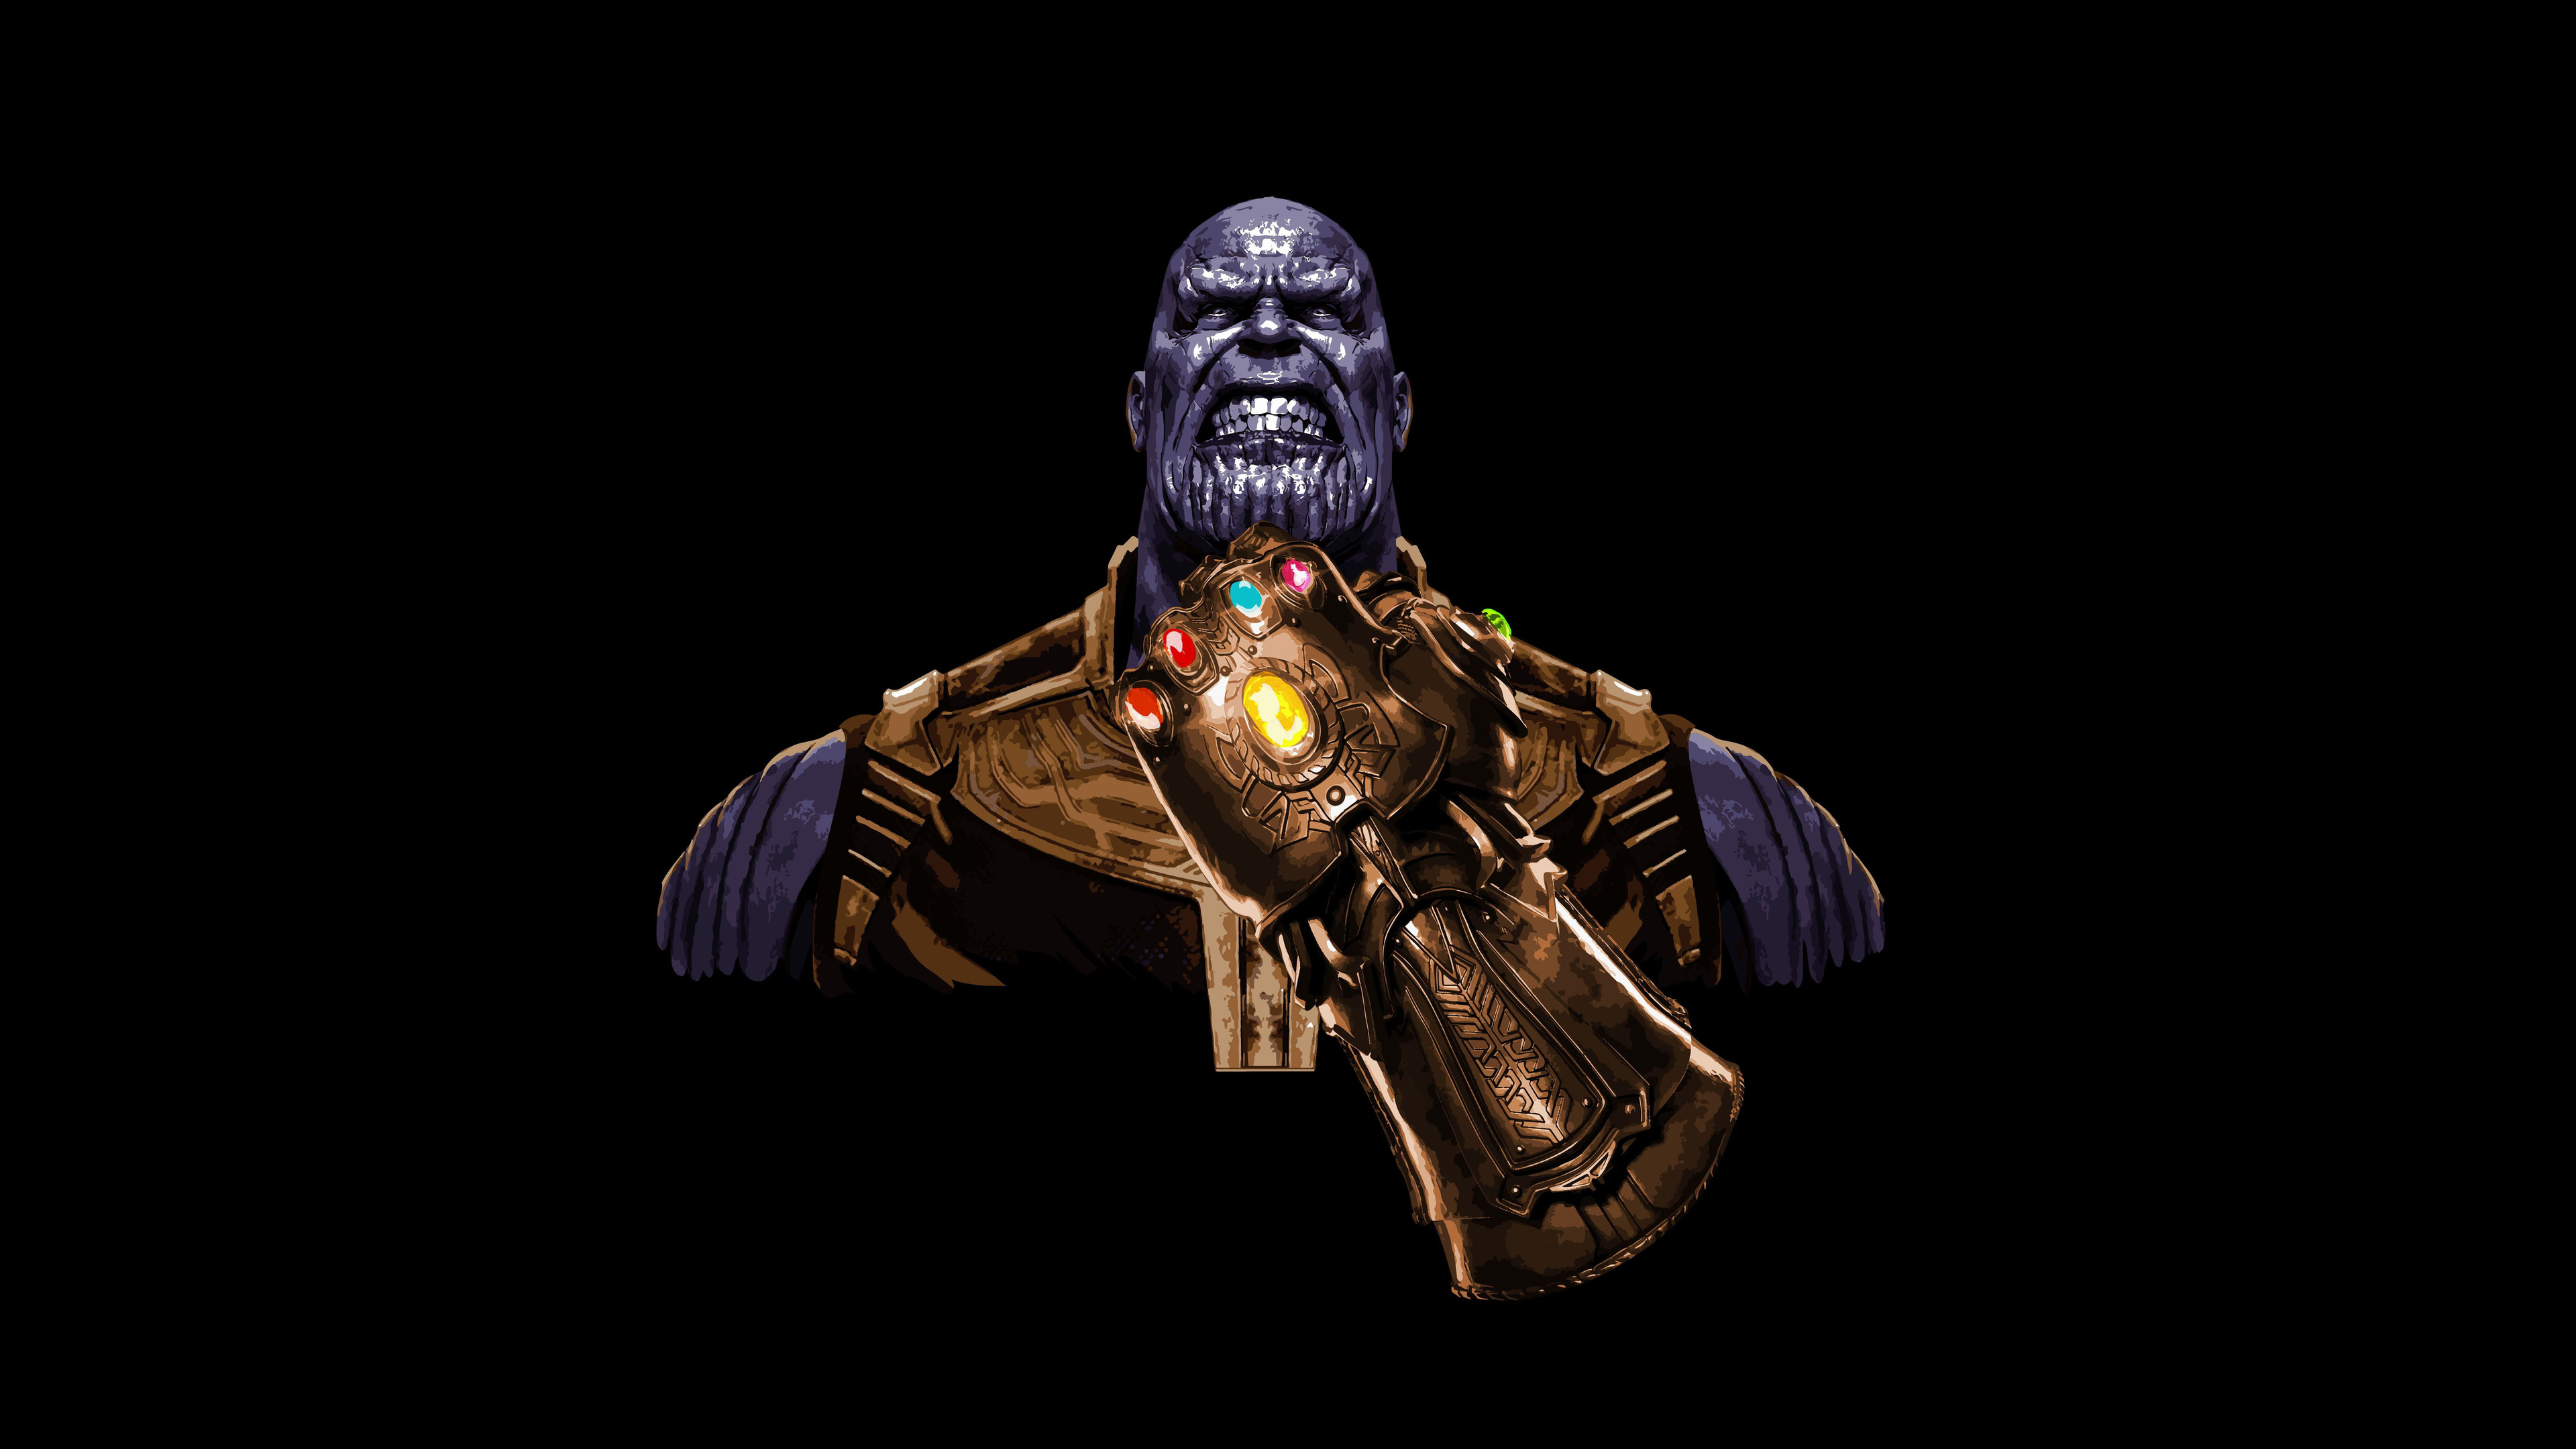 Thanos 4k thanos-wallpapers, superheroes wallpapers, hd ...